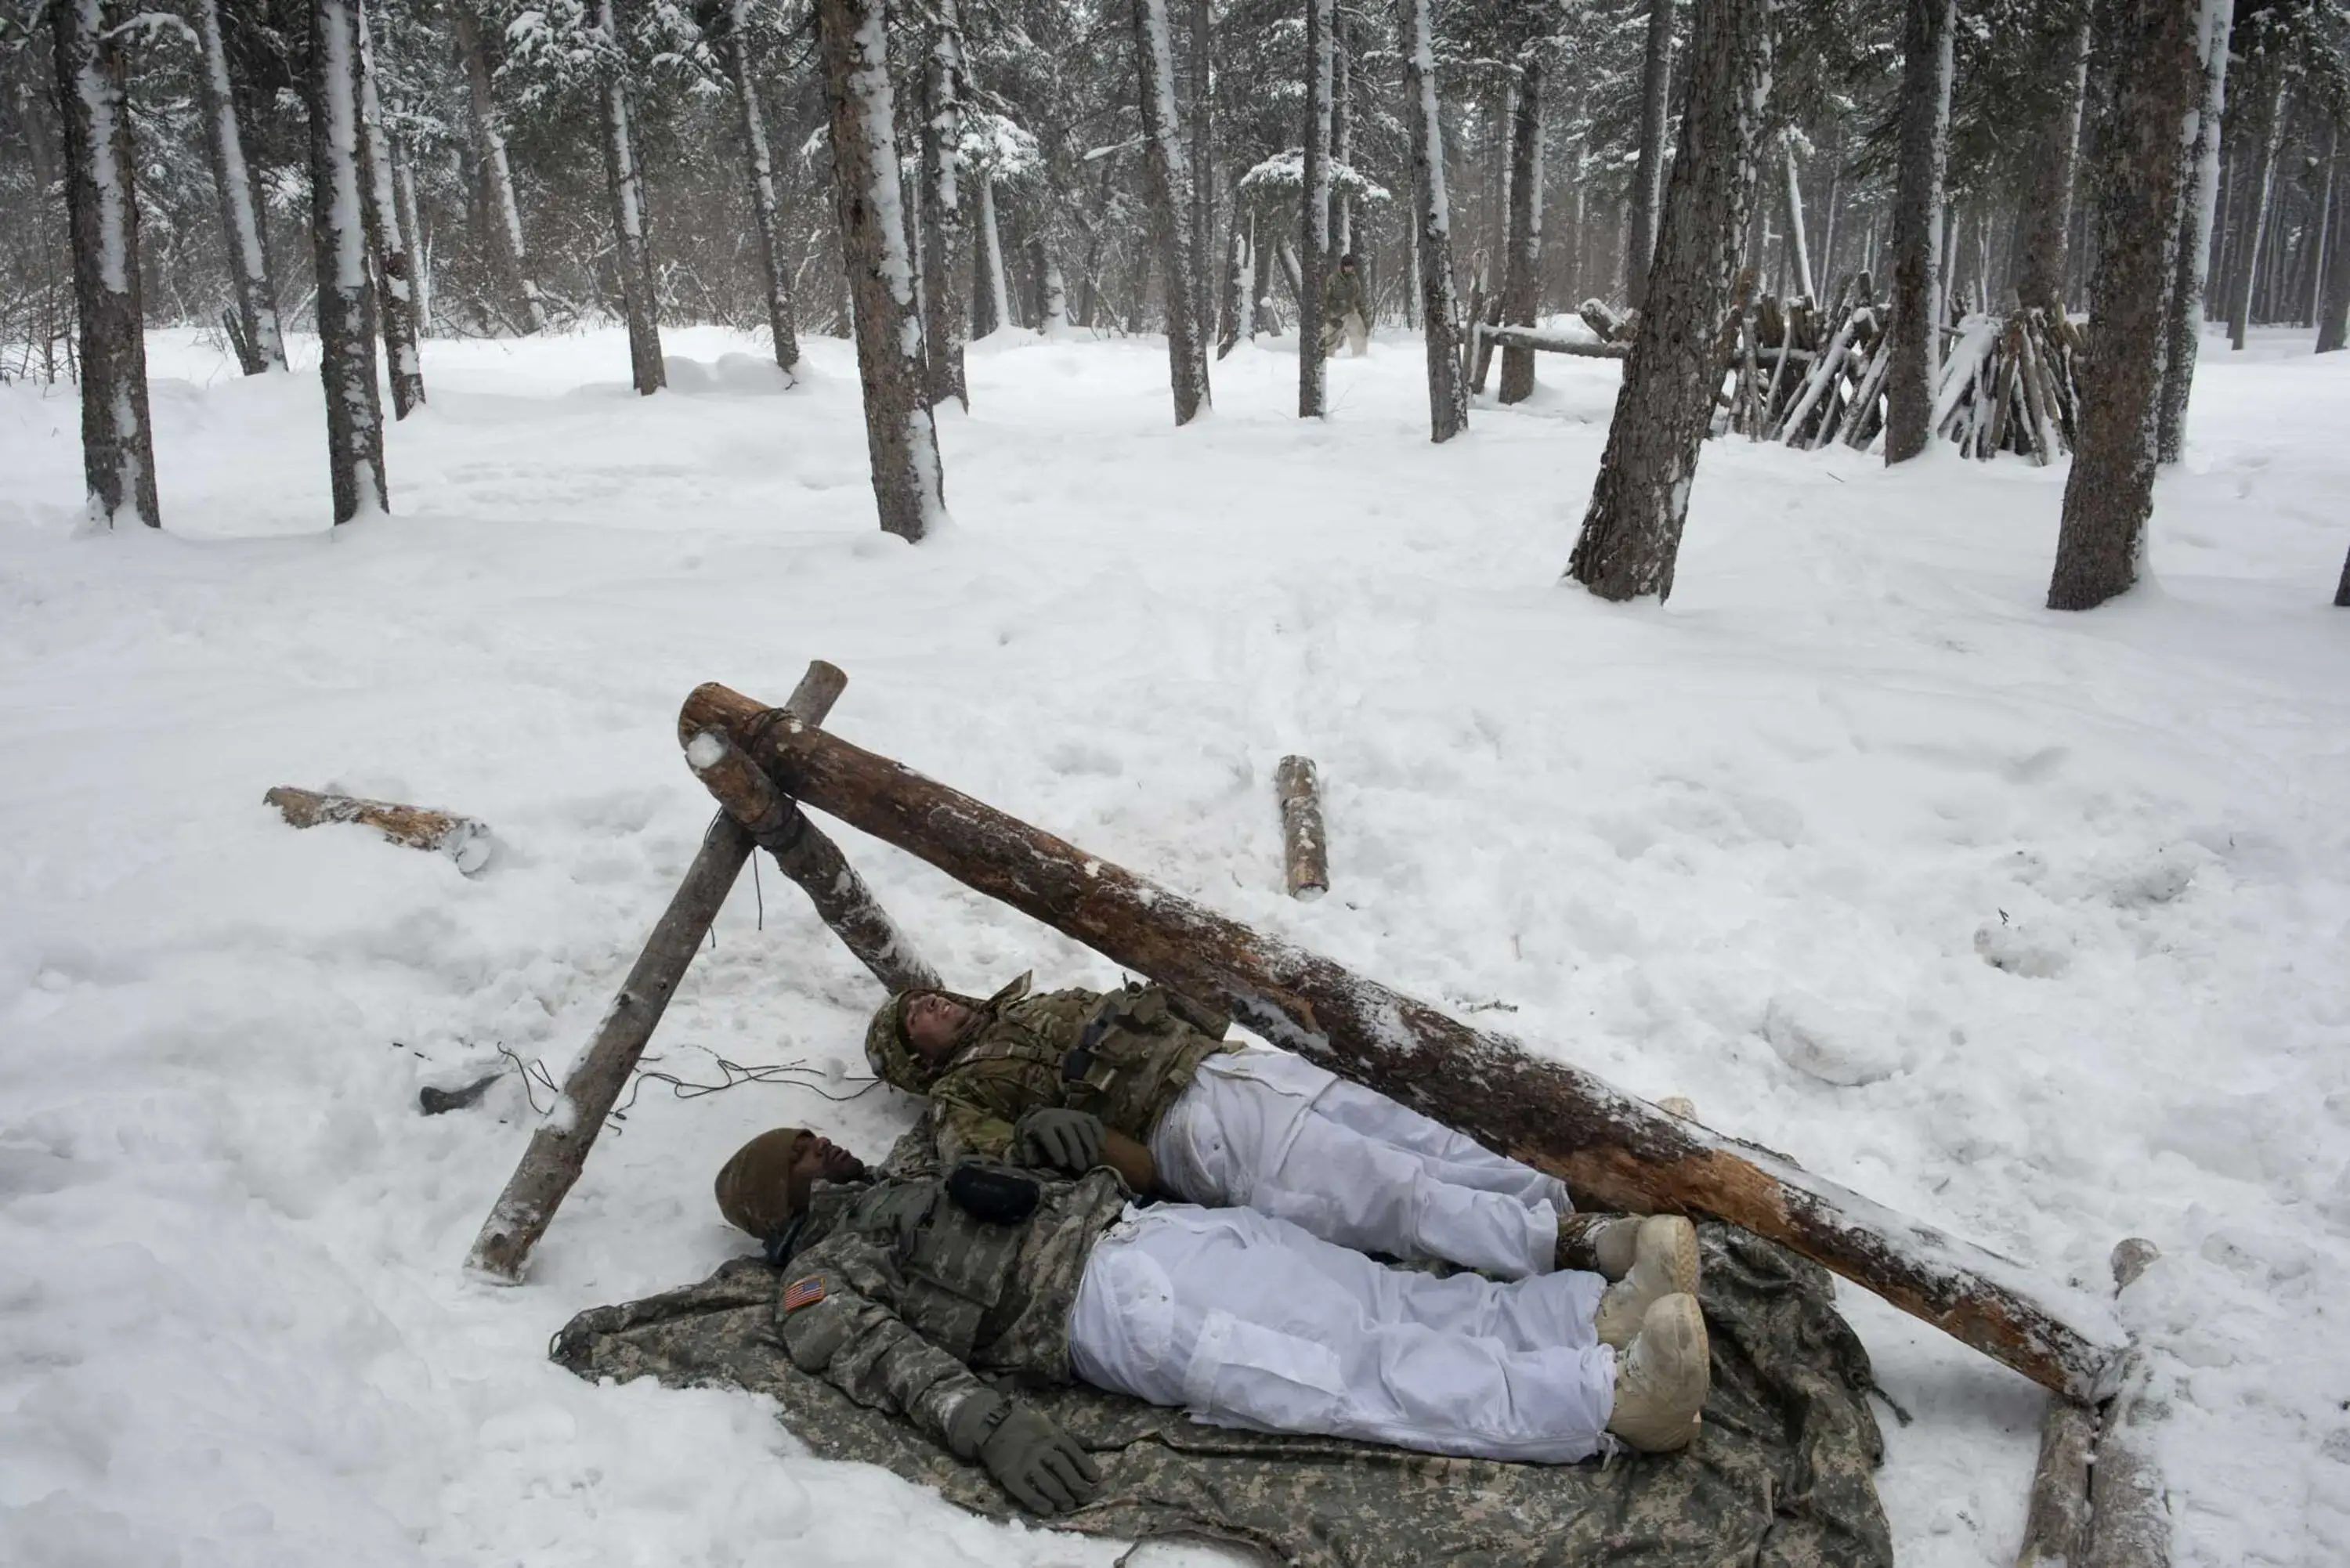 Two soldiers lie side by side on a thin sheet upon the snow-caked ground inside a crude wooden frame. They are testing the dimensions of a shelter they are building.